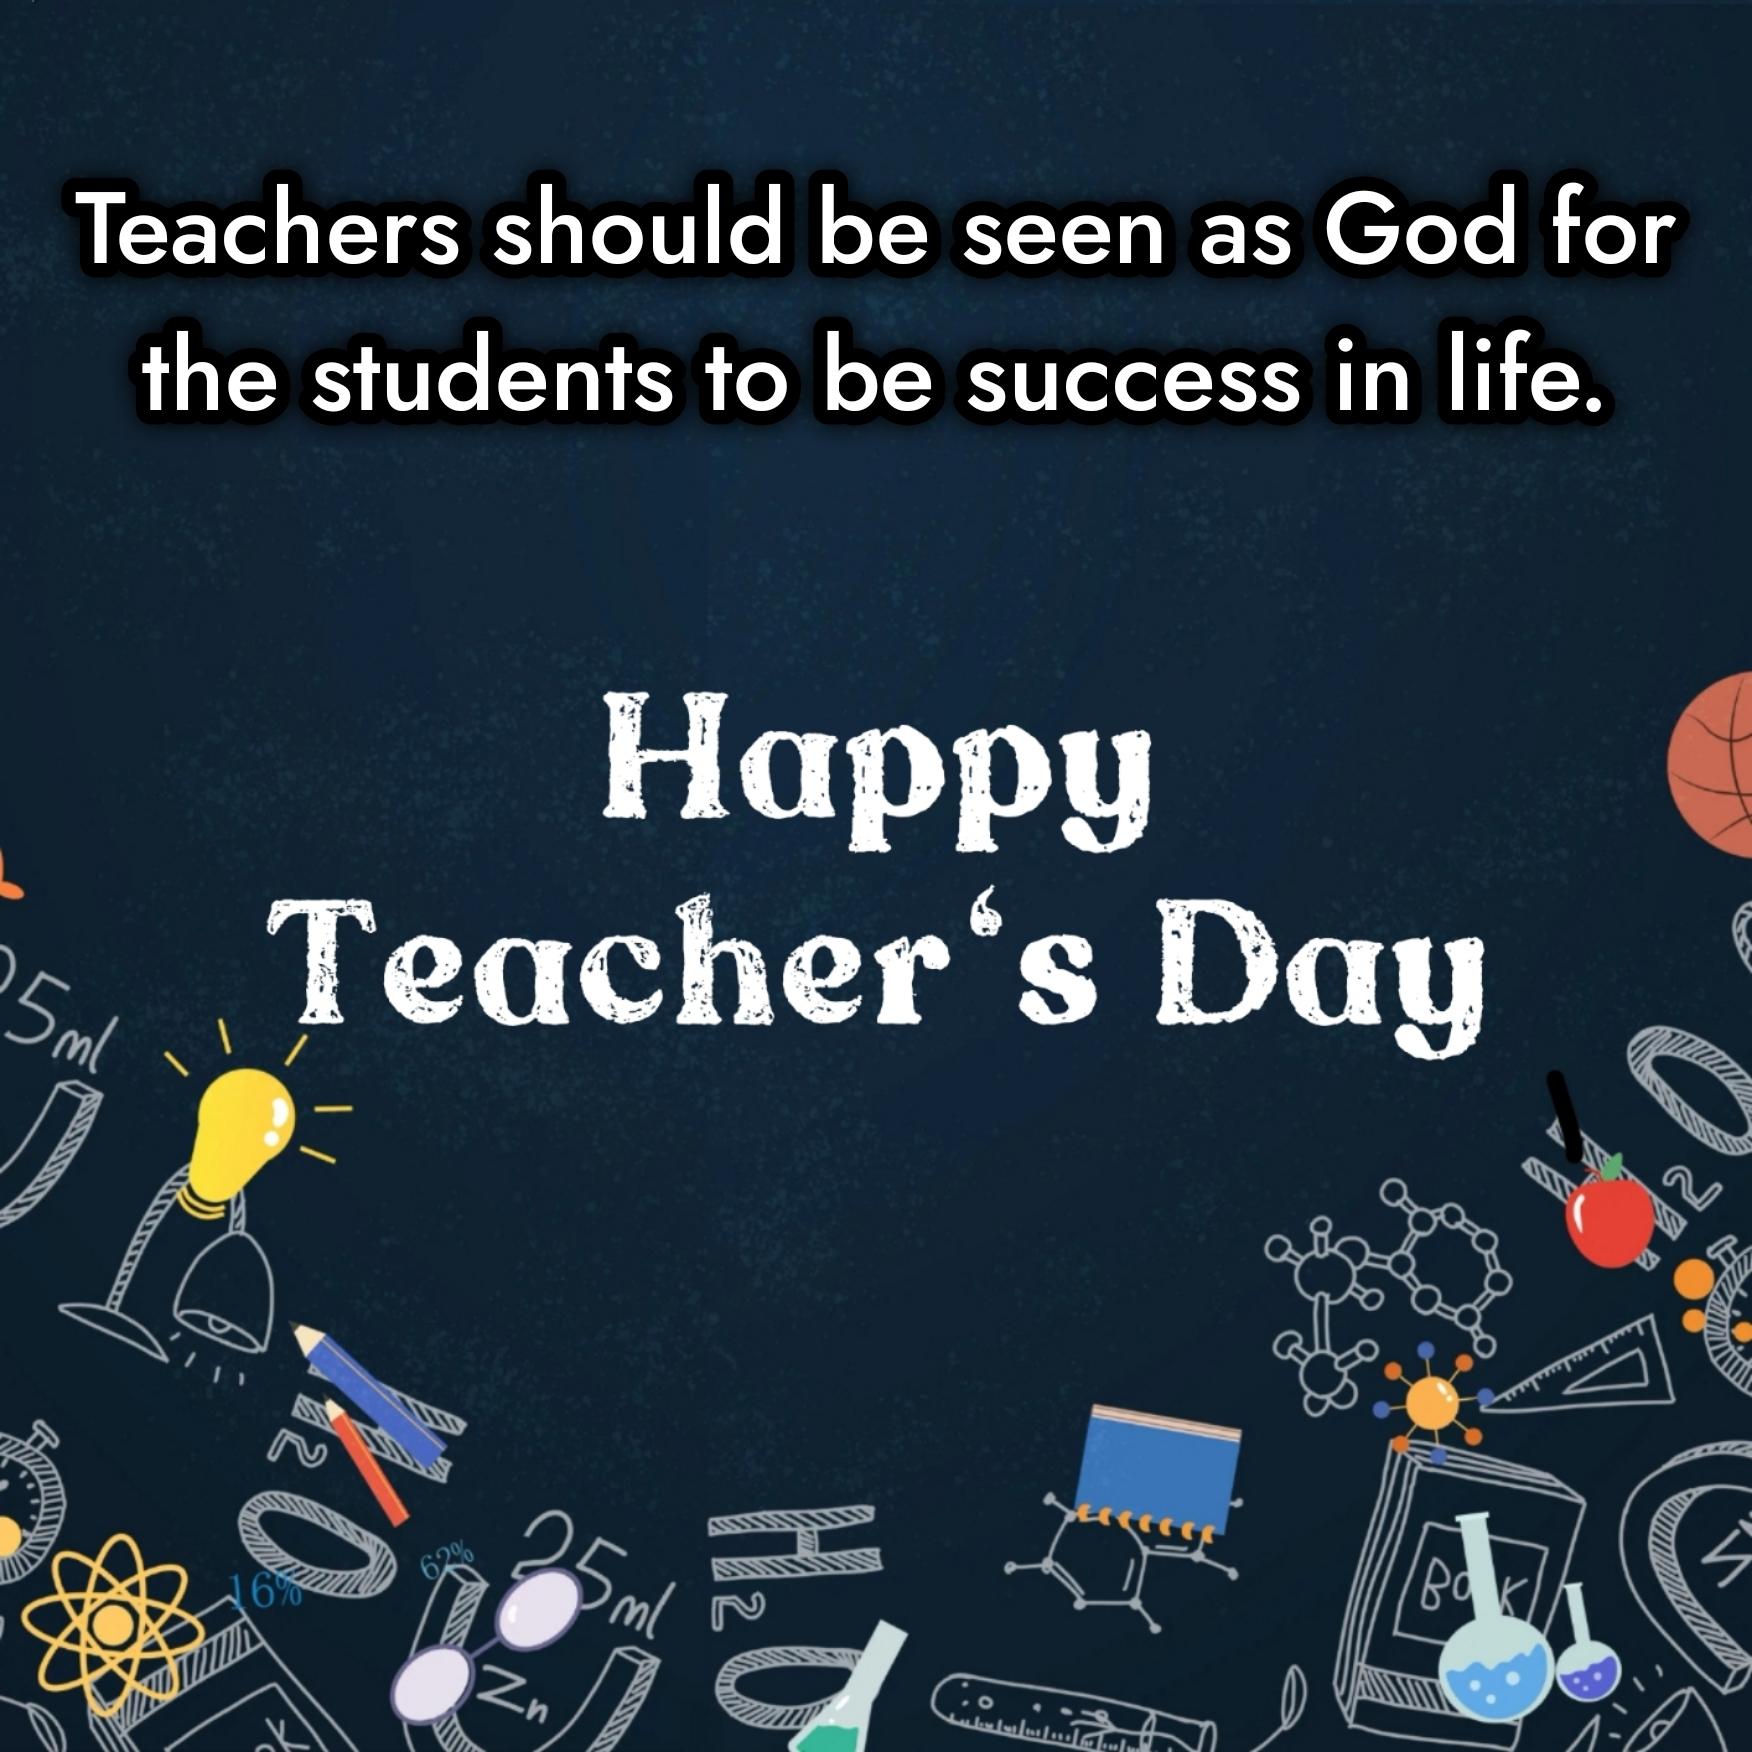 Teachers should be seen as God for the students